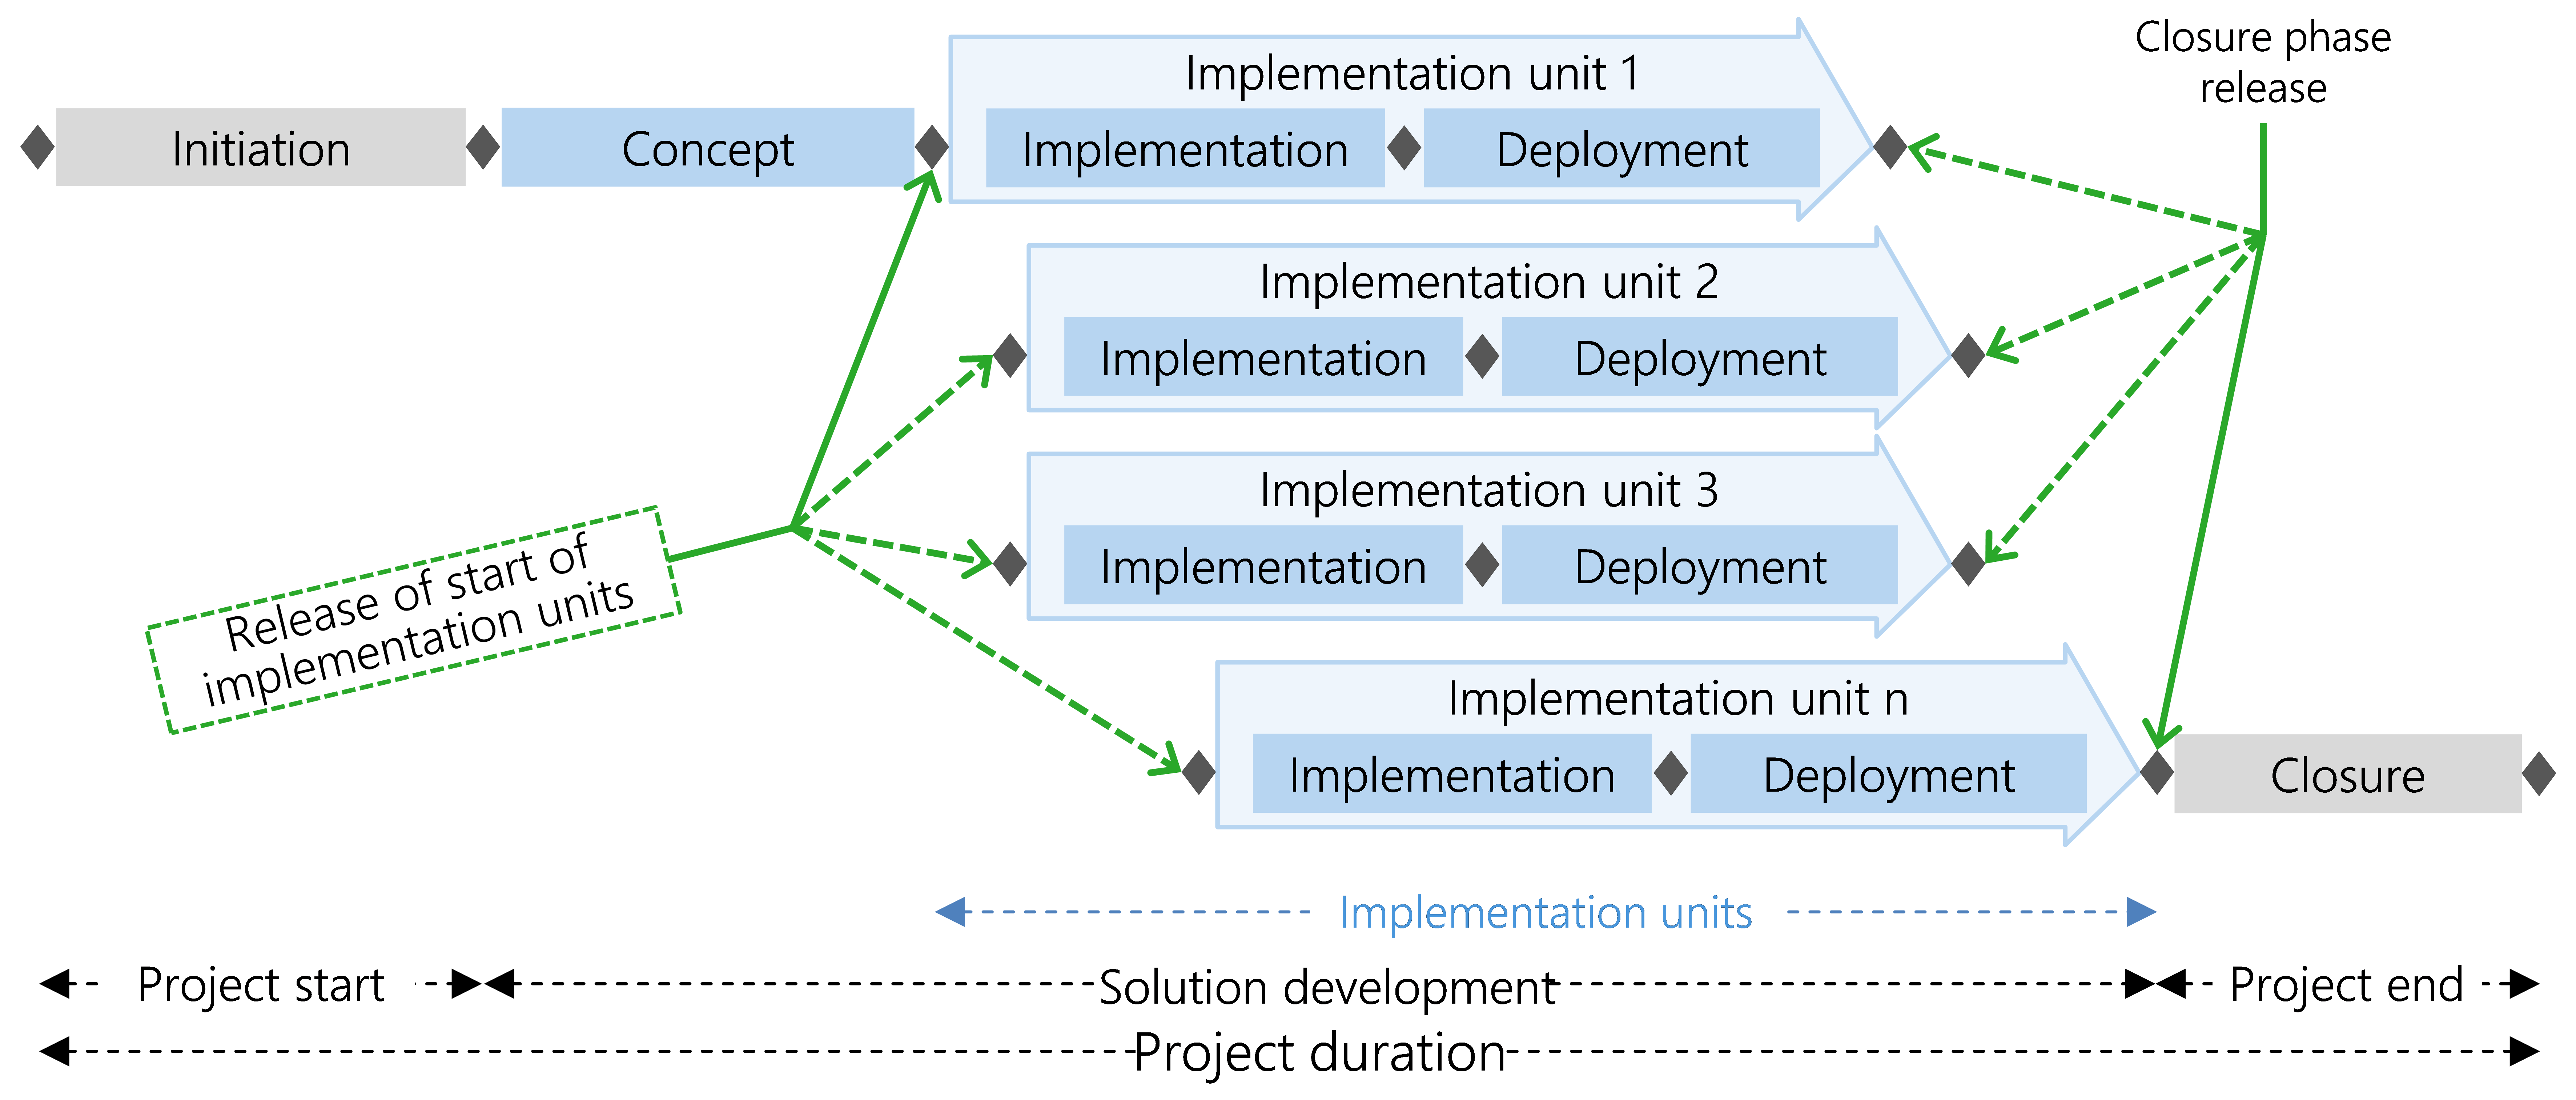 Figure 36: Implementation units overlapping in time using traditional approach